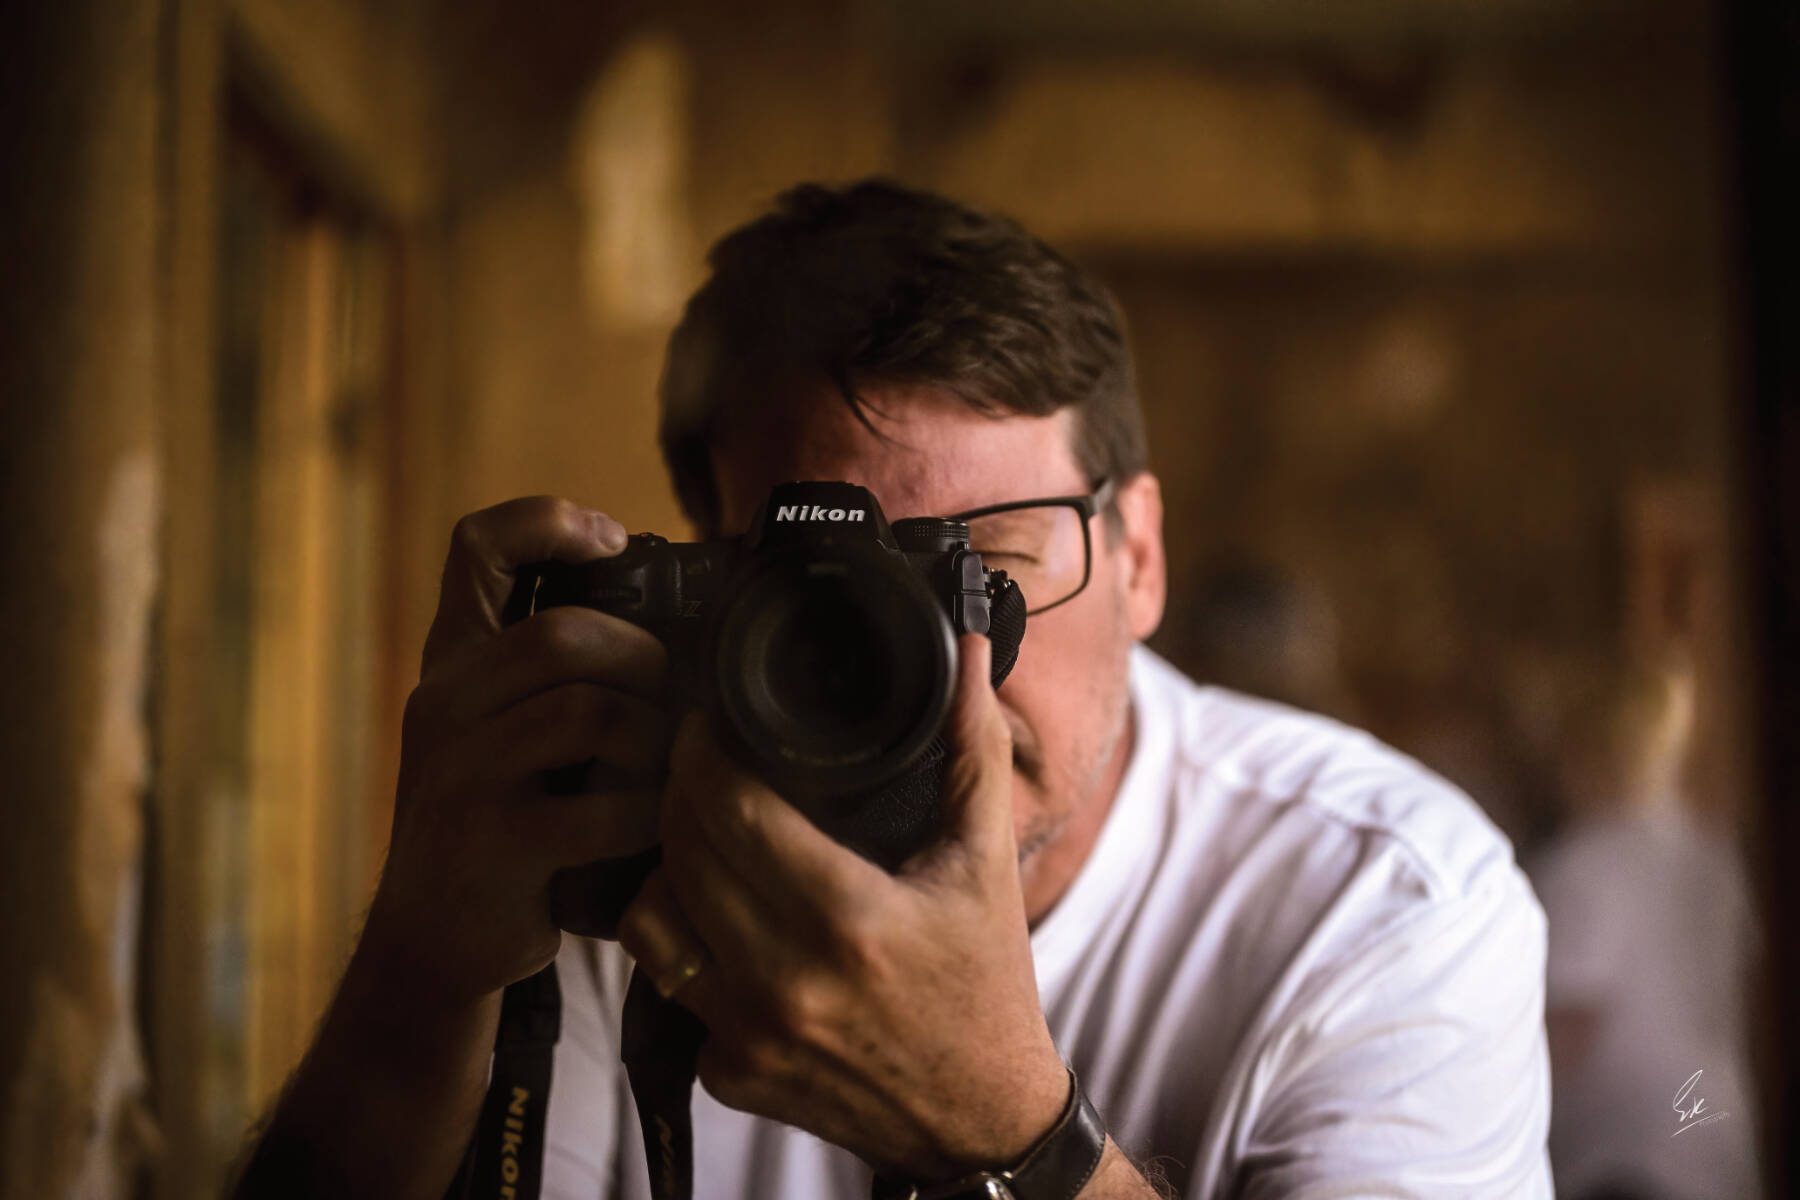 “Self Portrait,” taken by Dr. Edson Knapp in Bodie, Calif., where he shot the images of his latest exhibit, “Joy in the Journey,” on display at South Peninsula Hospital through July 4, 2023. Photo courtesy of Edson Knapp